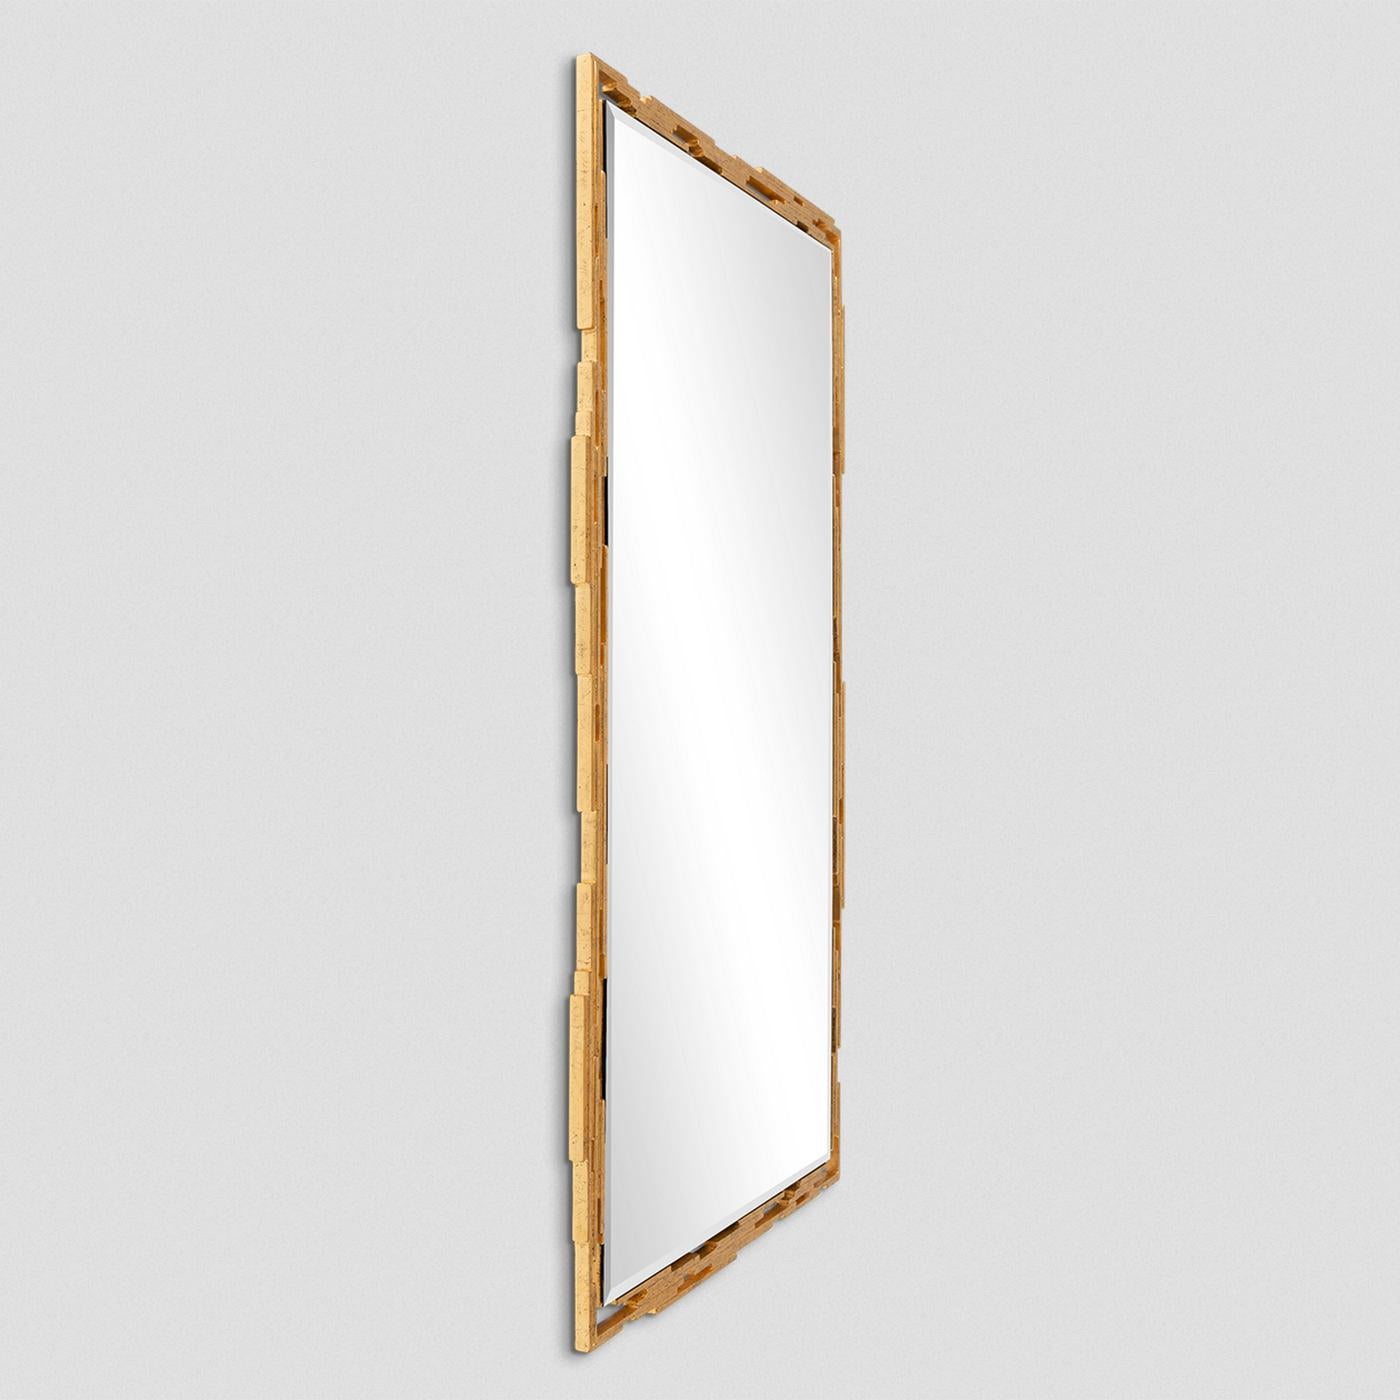 Mirror Oro Rods with hand-carved solid mahogany wood 
frame in antique gold finish, with beveled clear mirror glass.
Also available on request in:
L 104 x D 4 xH 168cm, price: 8500,00€
L 91 x D 4 xH 150cm, price: 6900,00€.